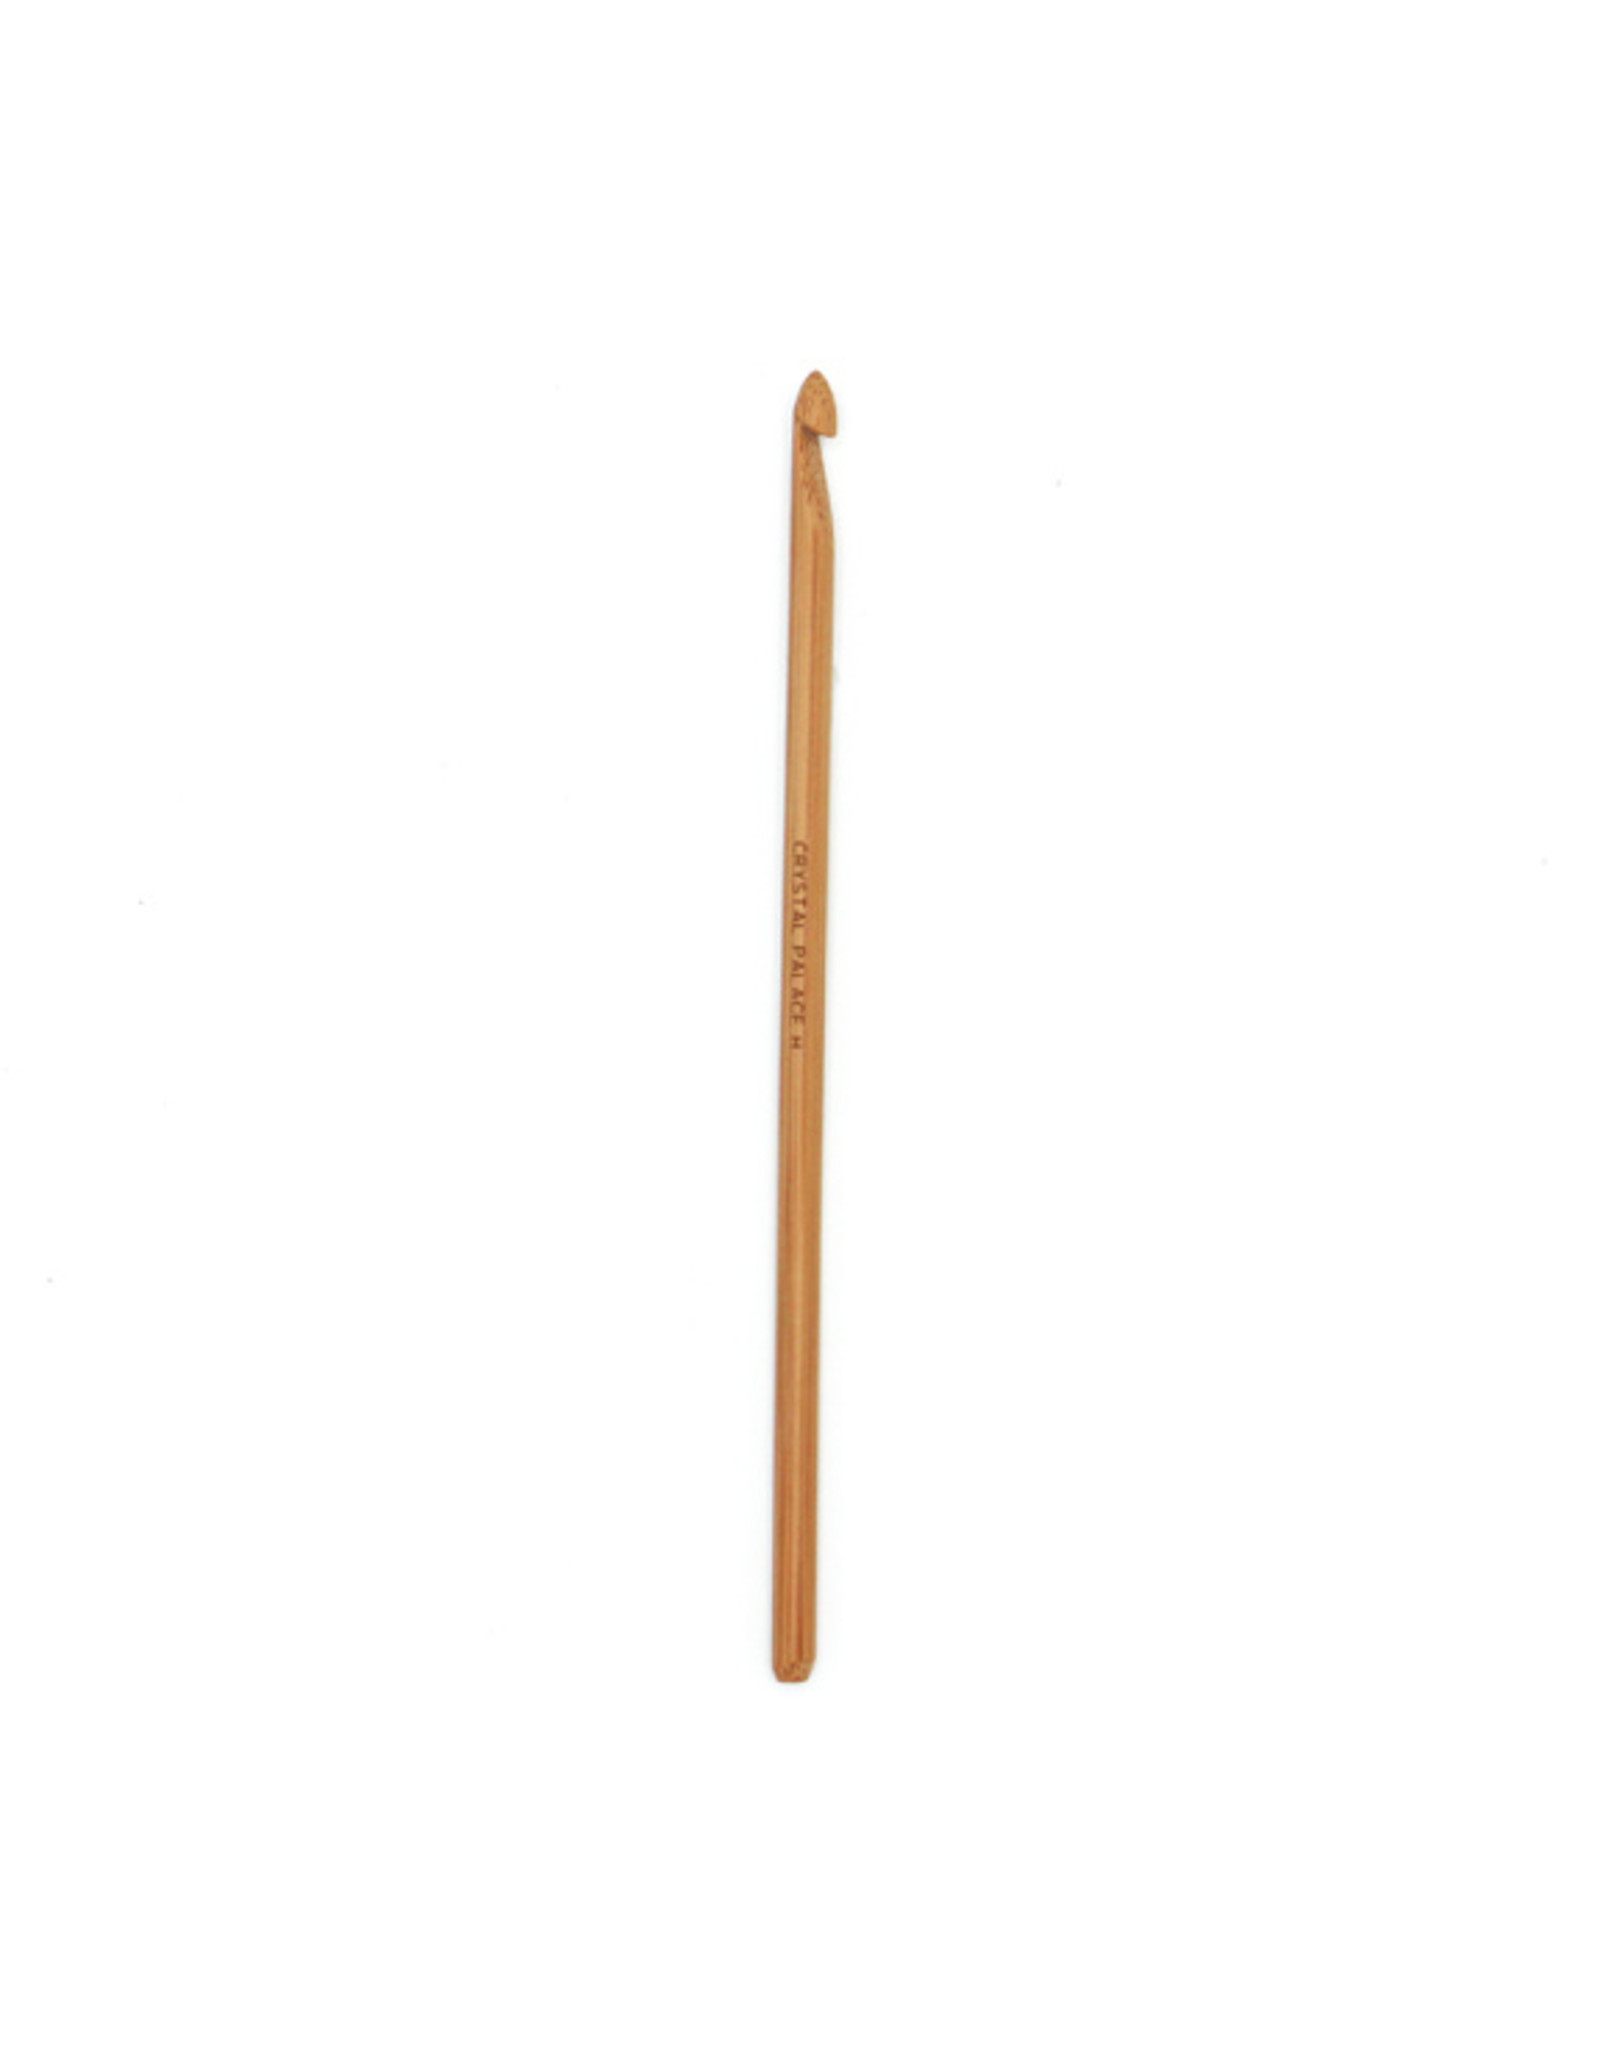 This 7 mm bamboo crochet hook is handmade and has an extra deep, super  smooth cut for the hook. Idea